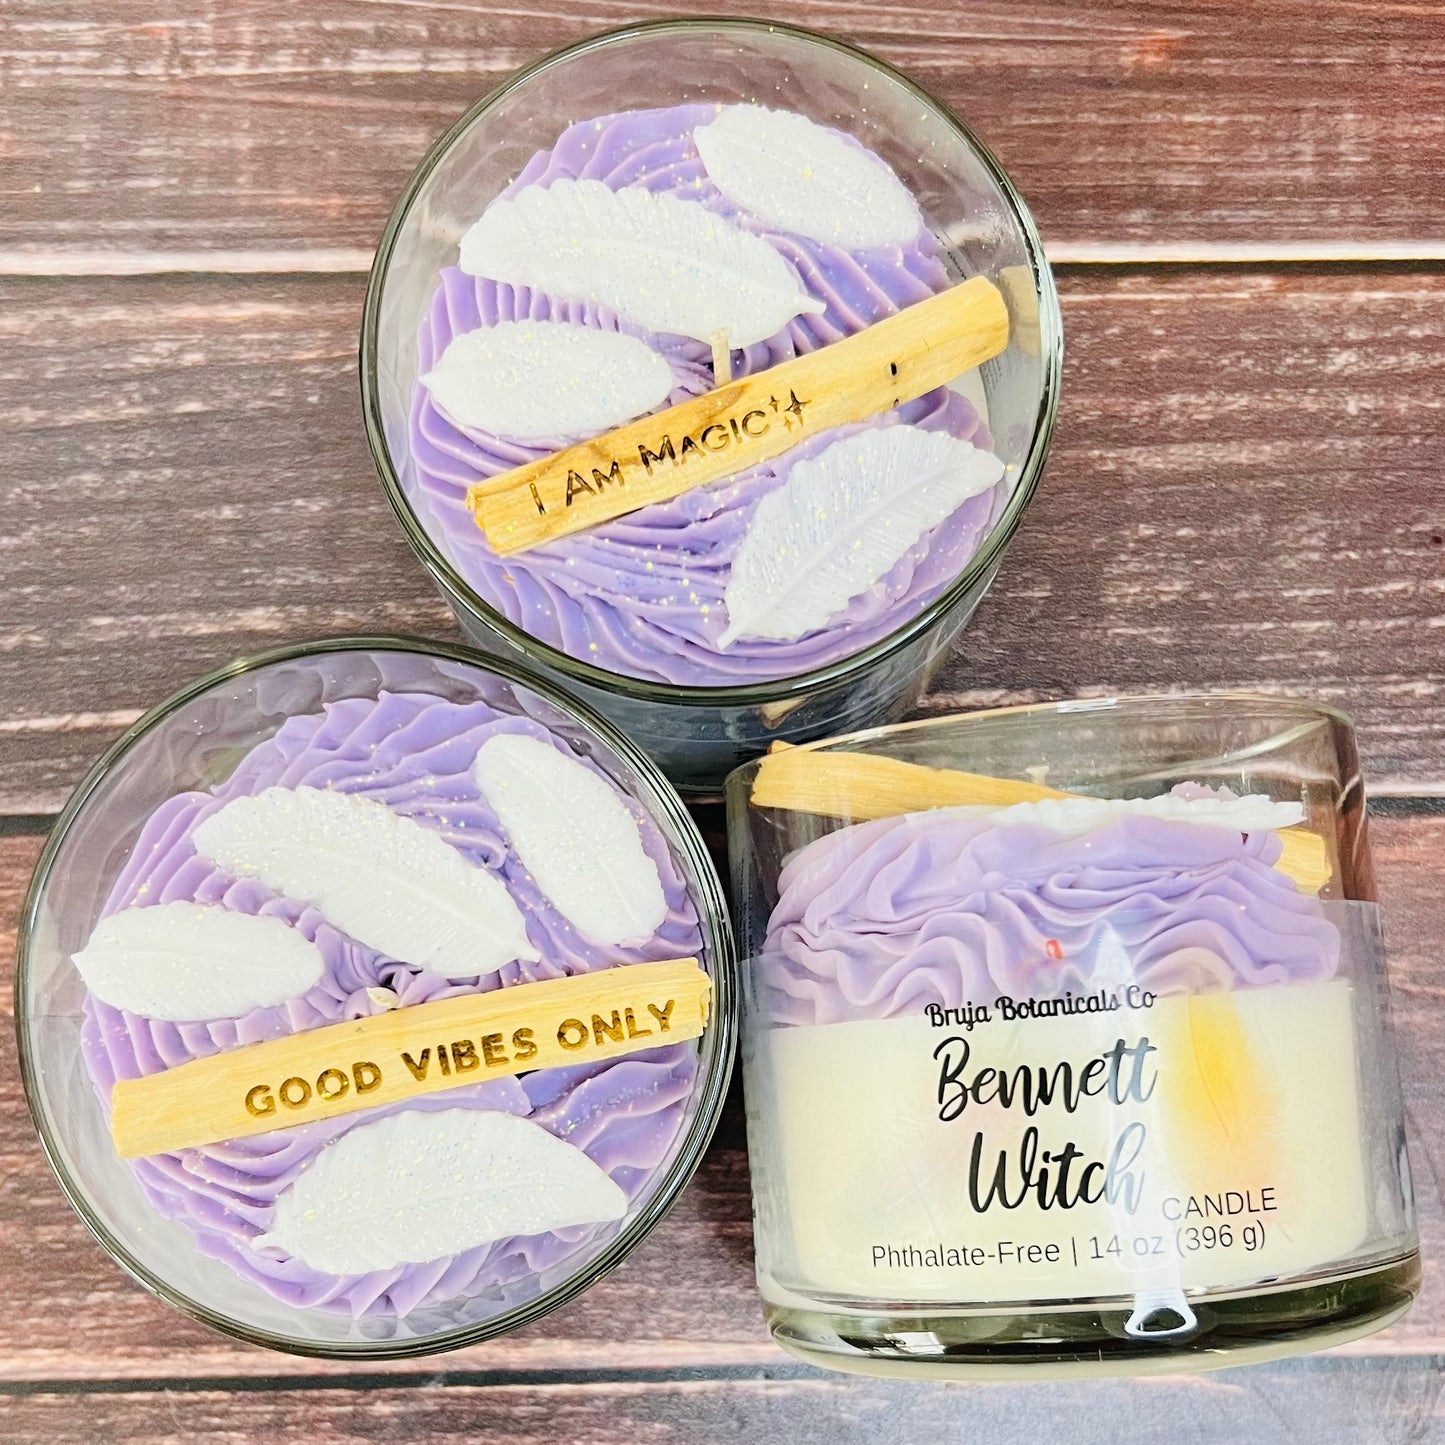 Bennett Witch Whipped Candle (TVD inspired)